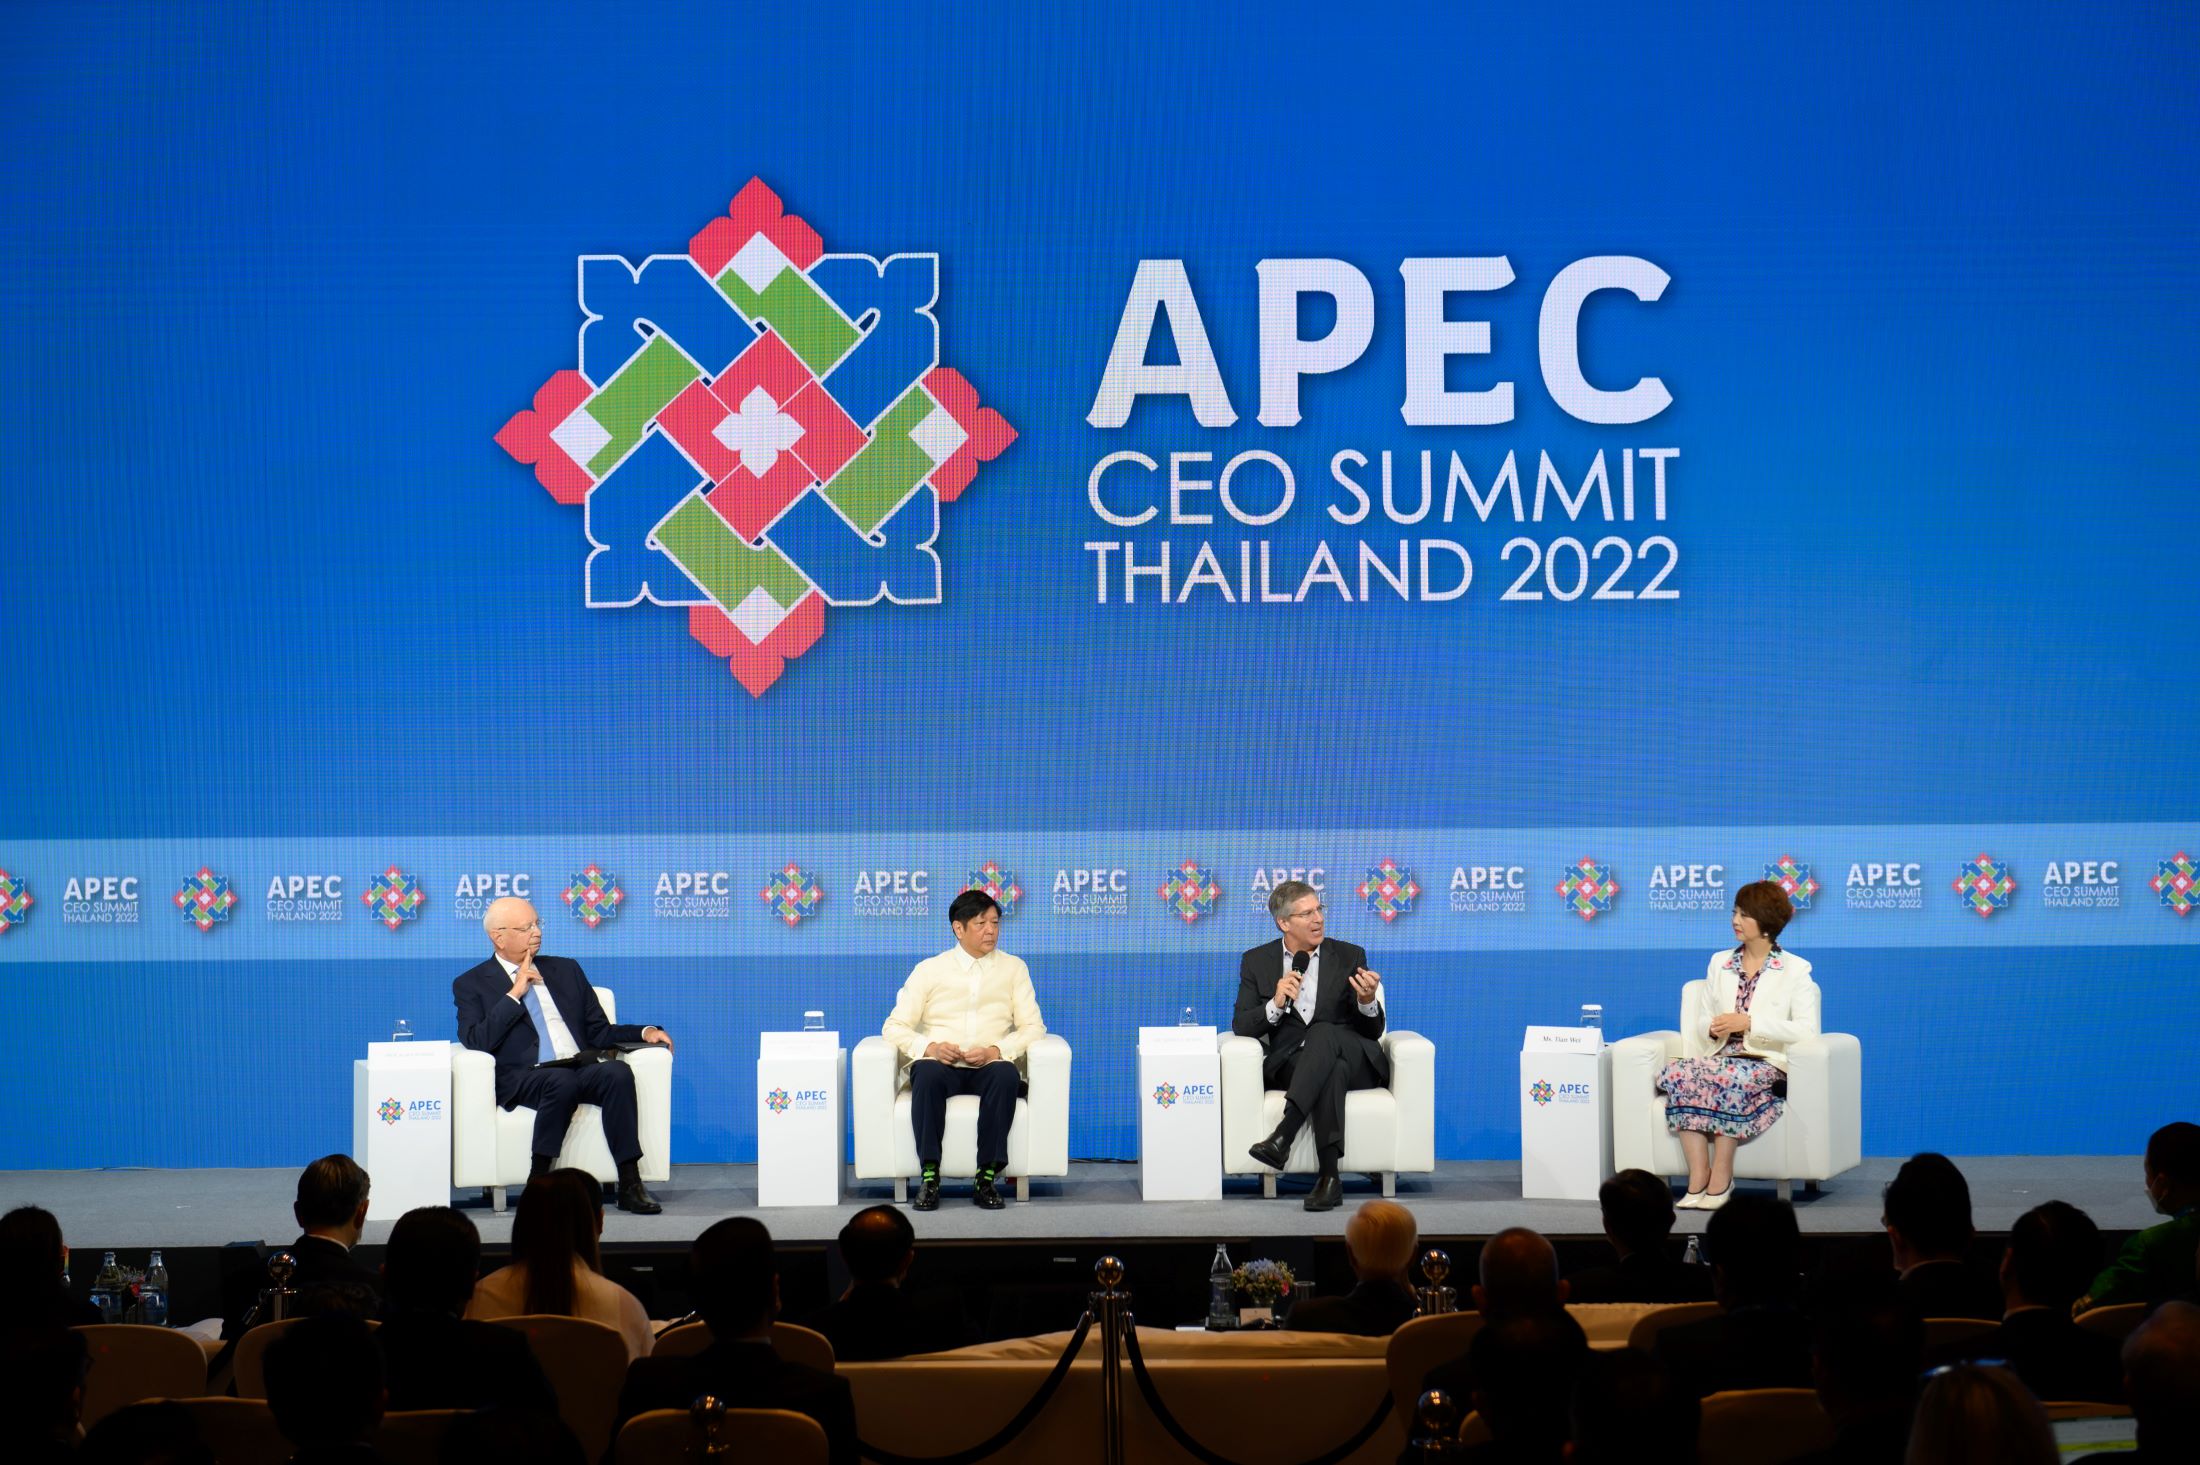 PwC's Global Chairman exchanged insights at APEC CEO Summit RYT9